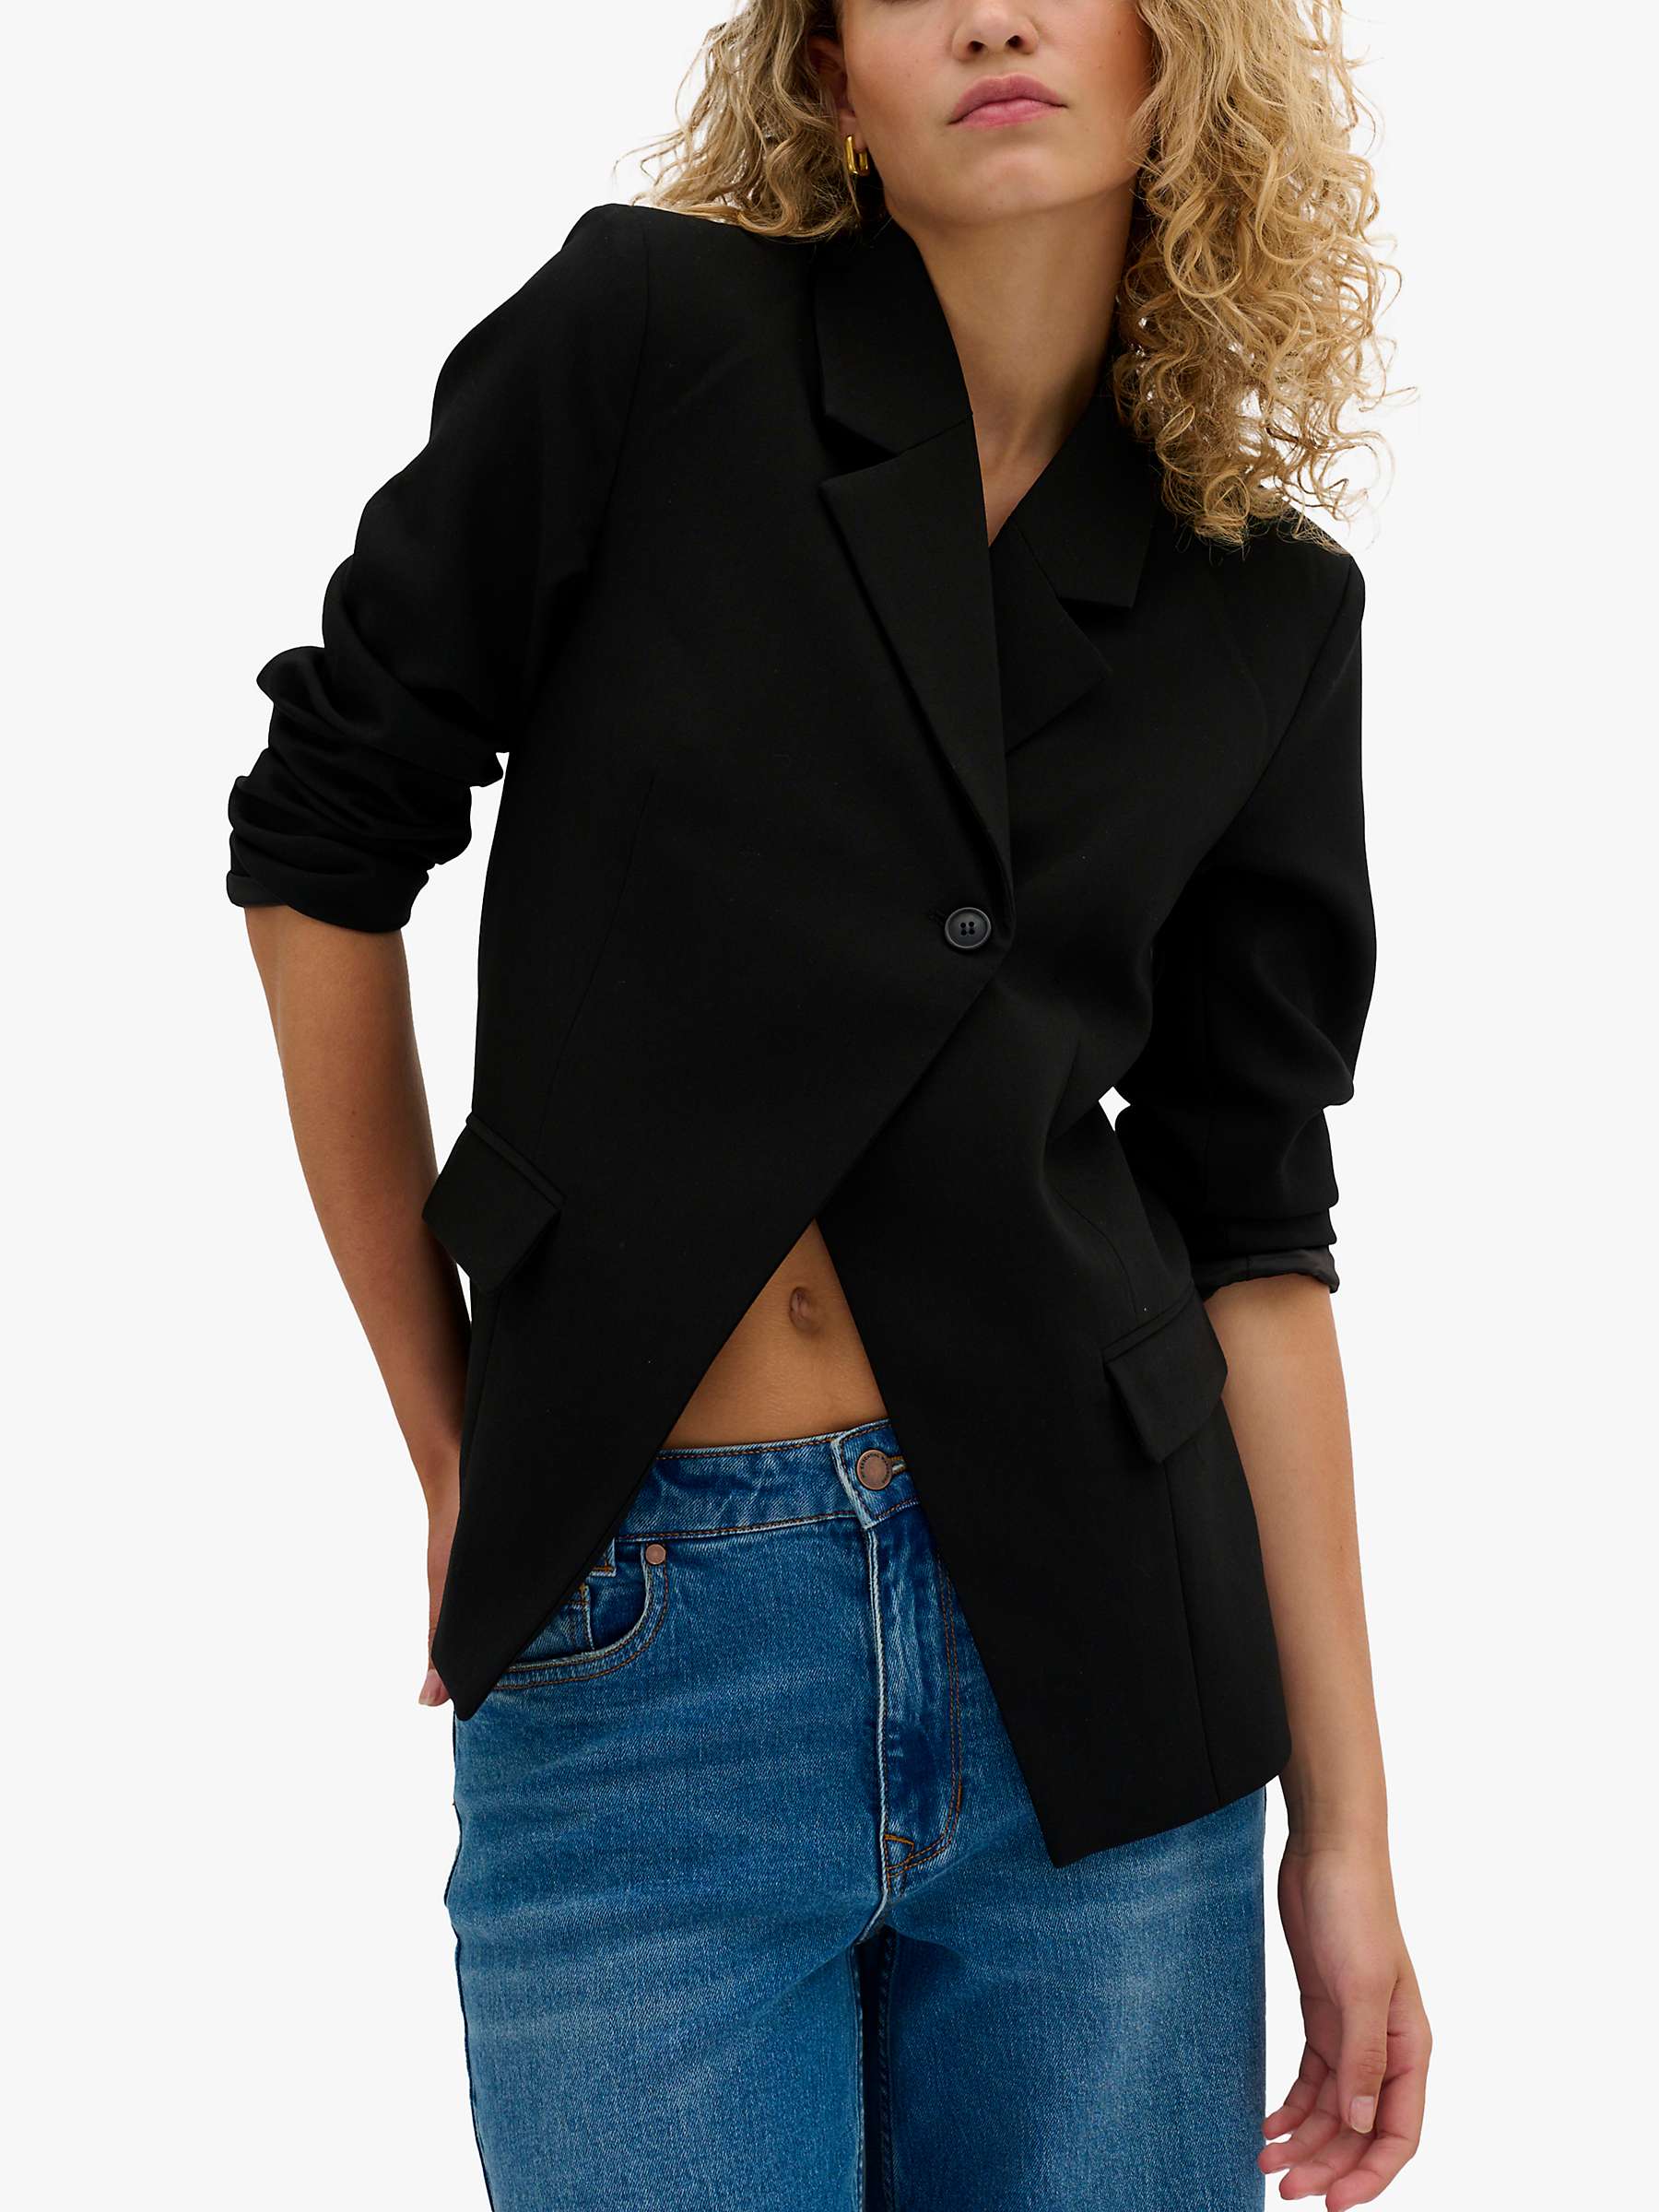 Buy MY ESSENTIAL WARDROBE Space Double Breasted Blazer, Black Online at johnlewis.com